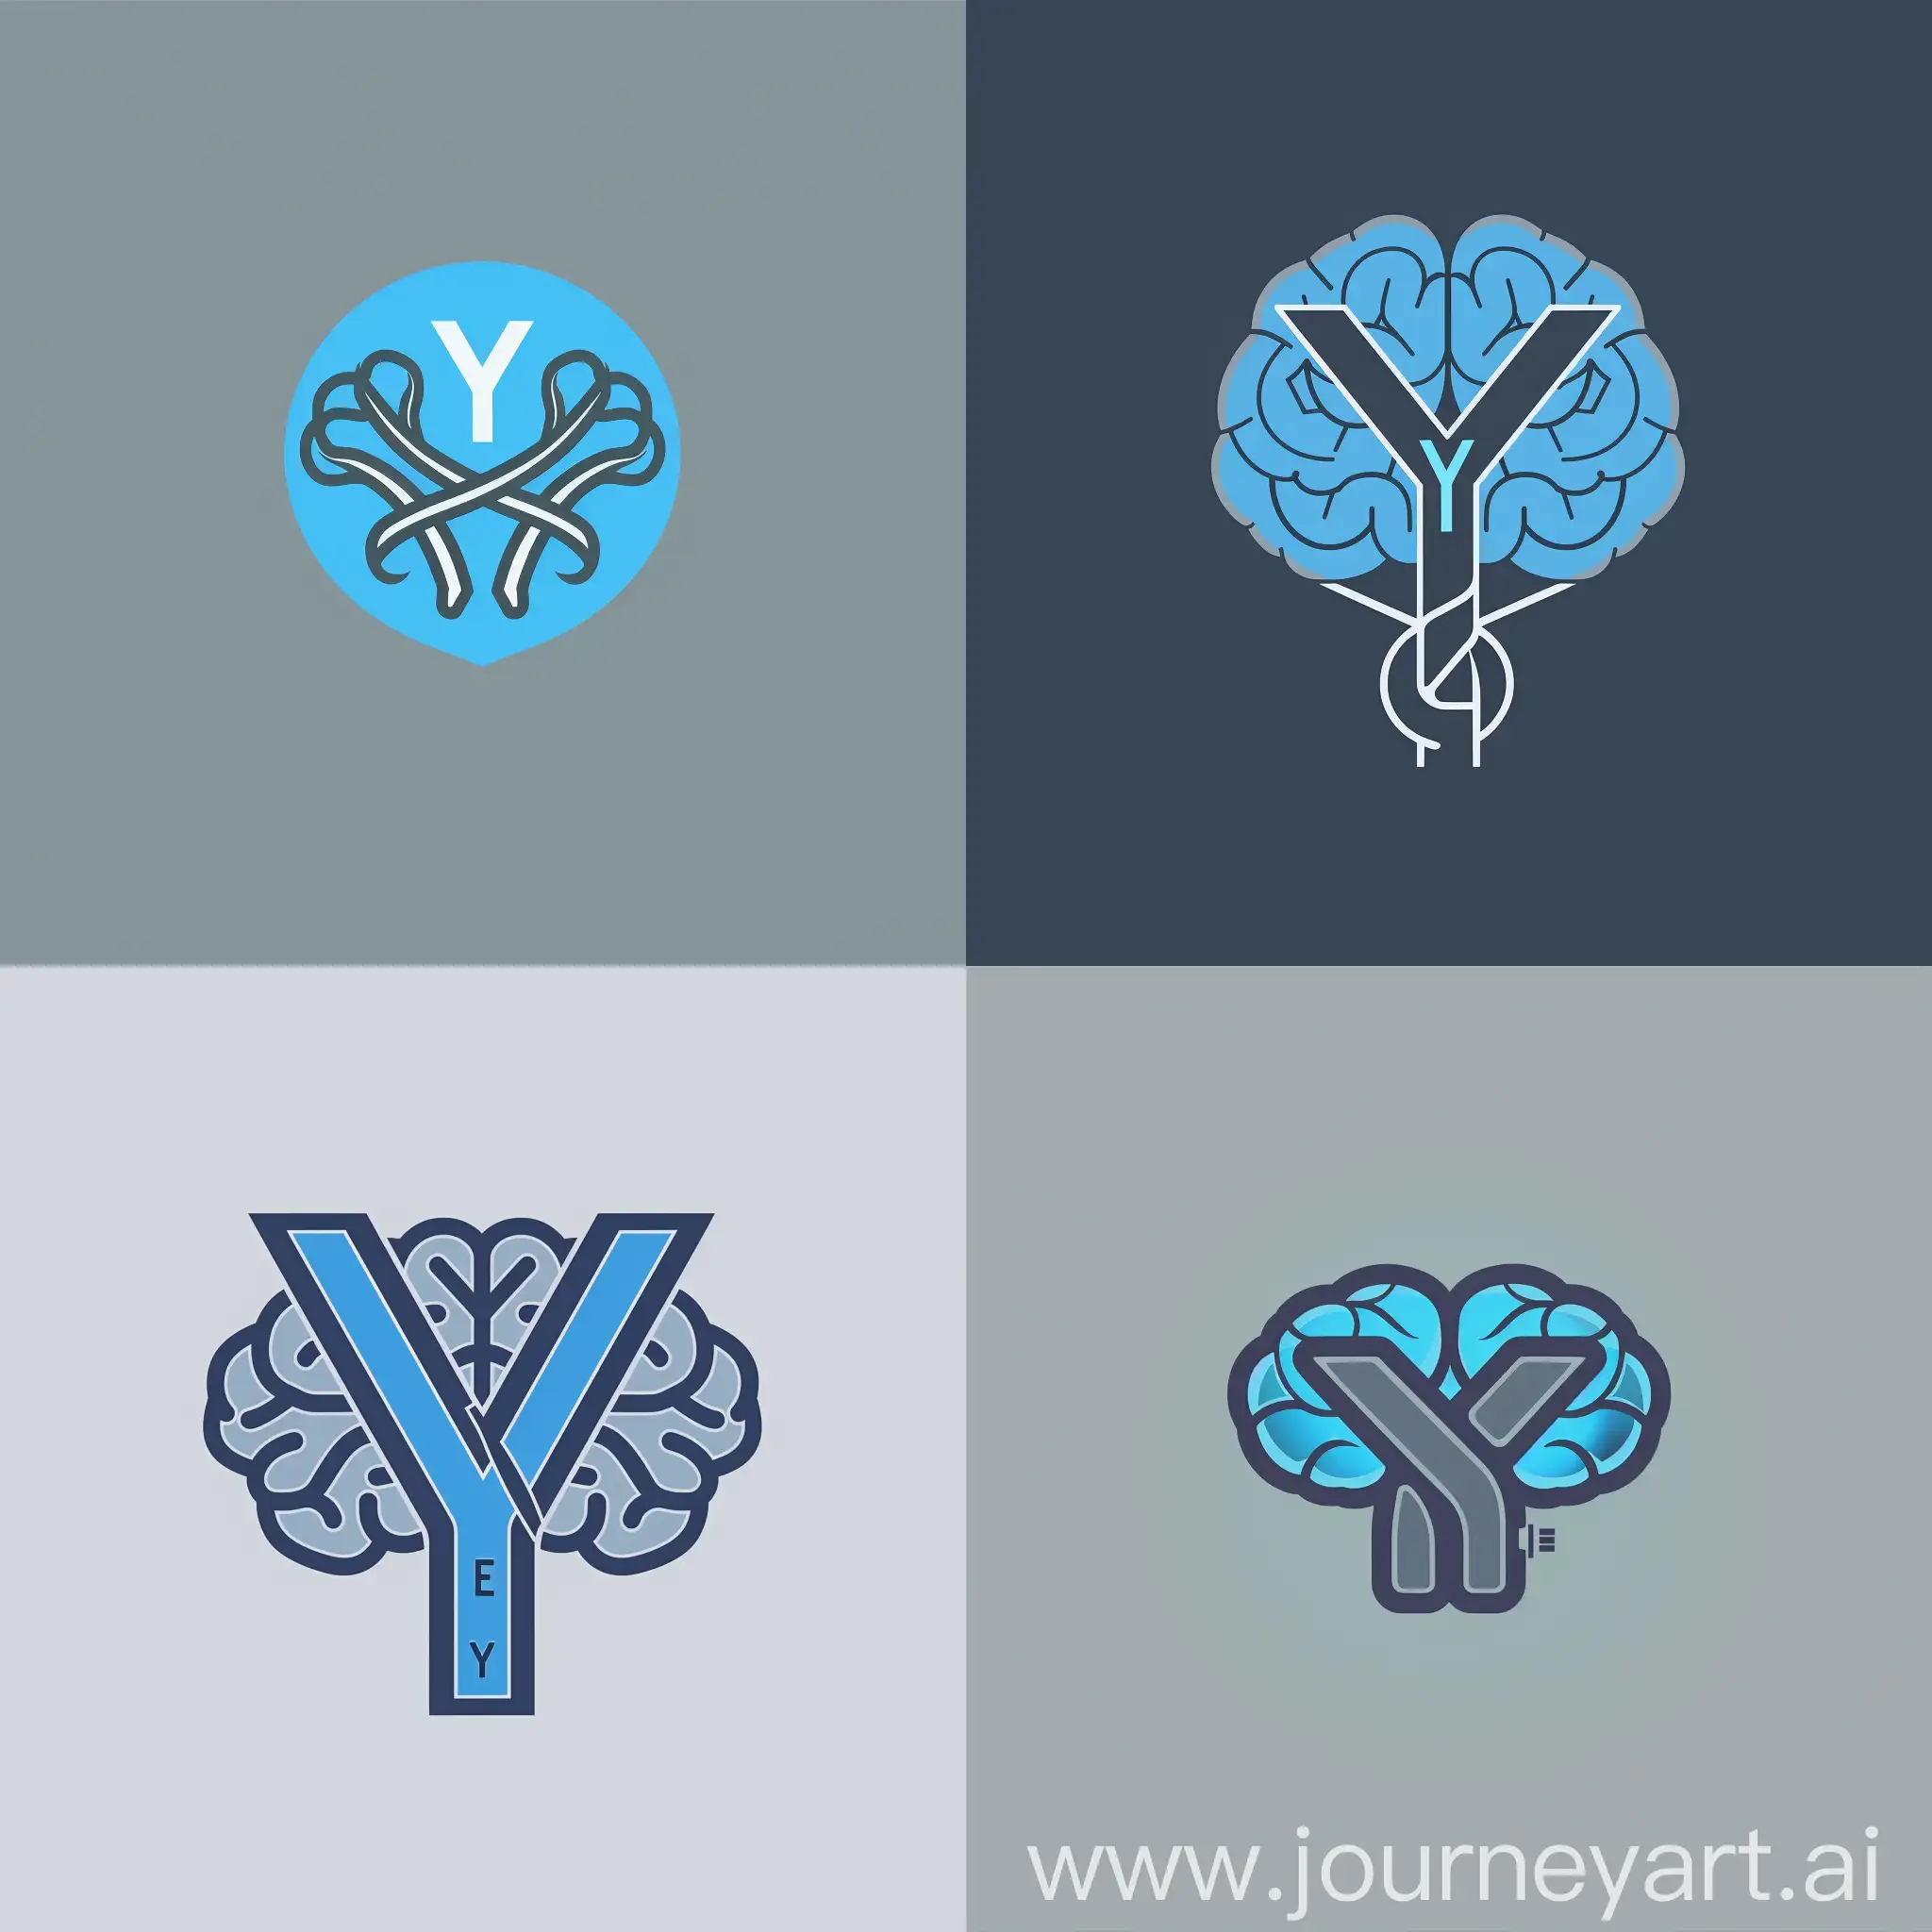 2d flat minimalist design logo featuring a Y sign intertwined with an artificial intelligence brain motif, solid background blending blue and gray colors, sleek and modern for "YEKAL" startup, digital art